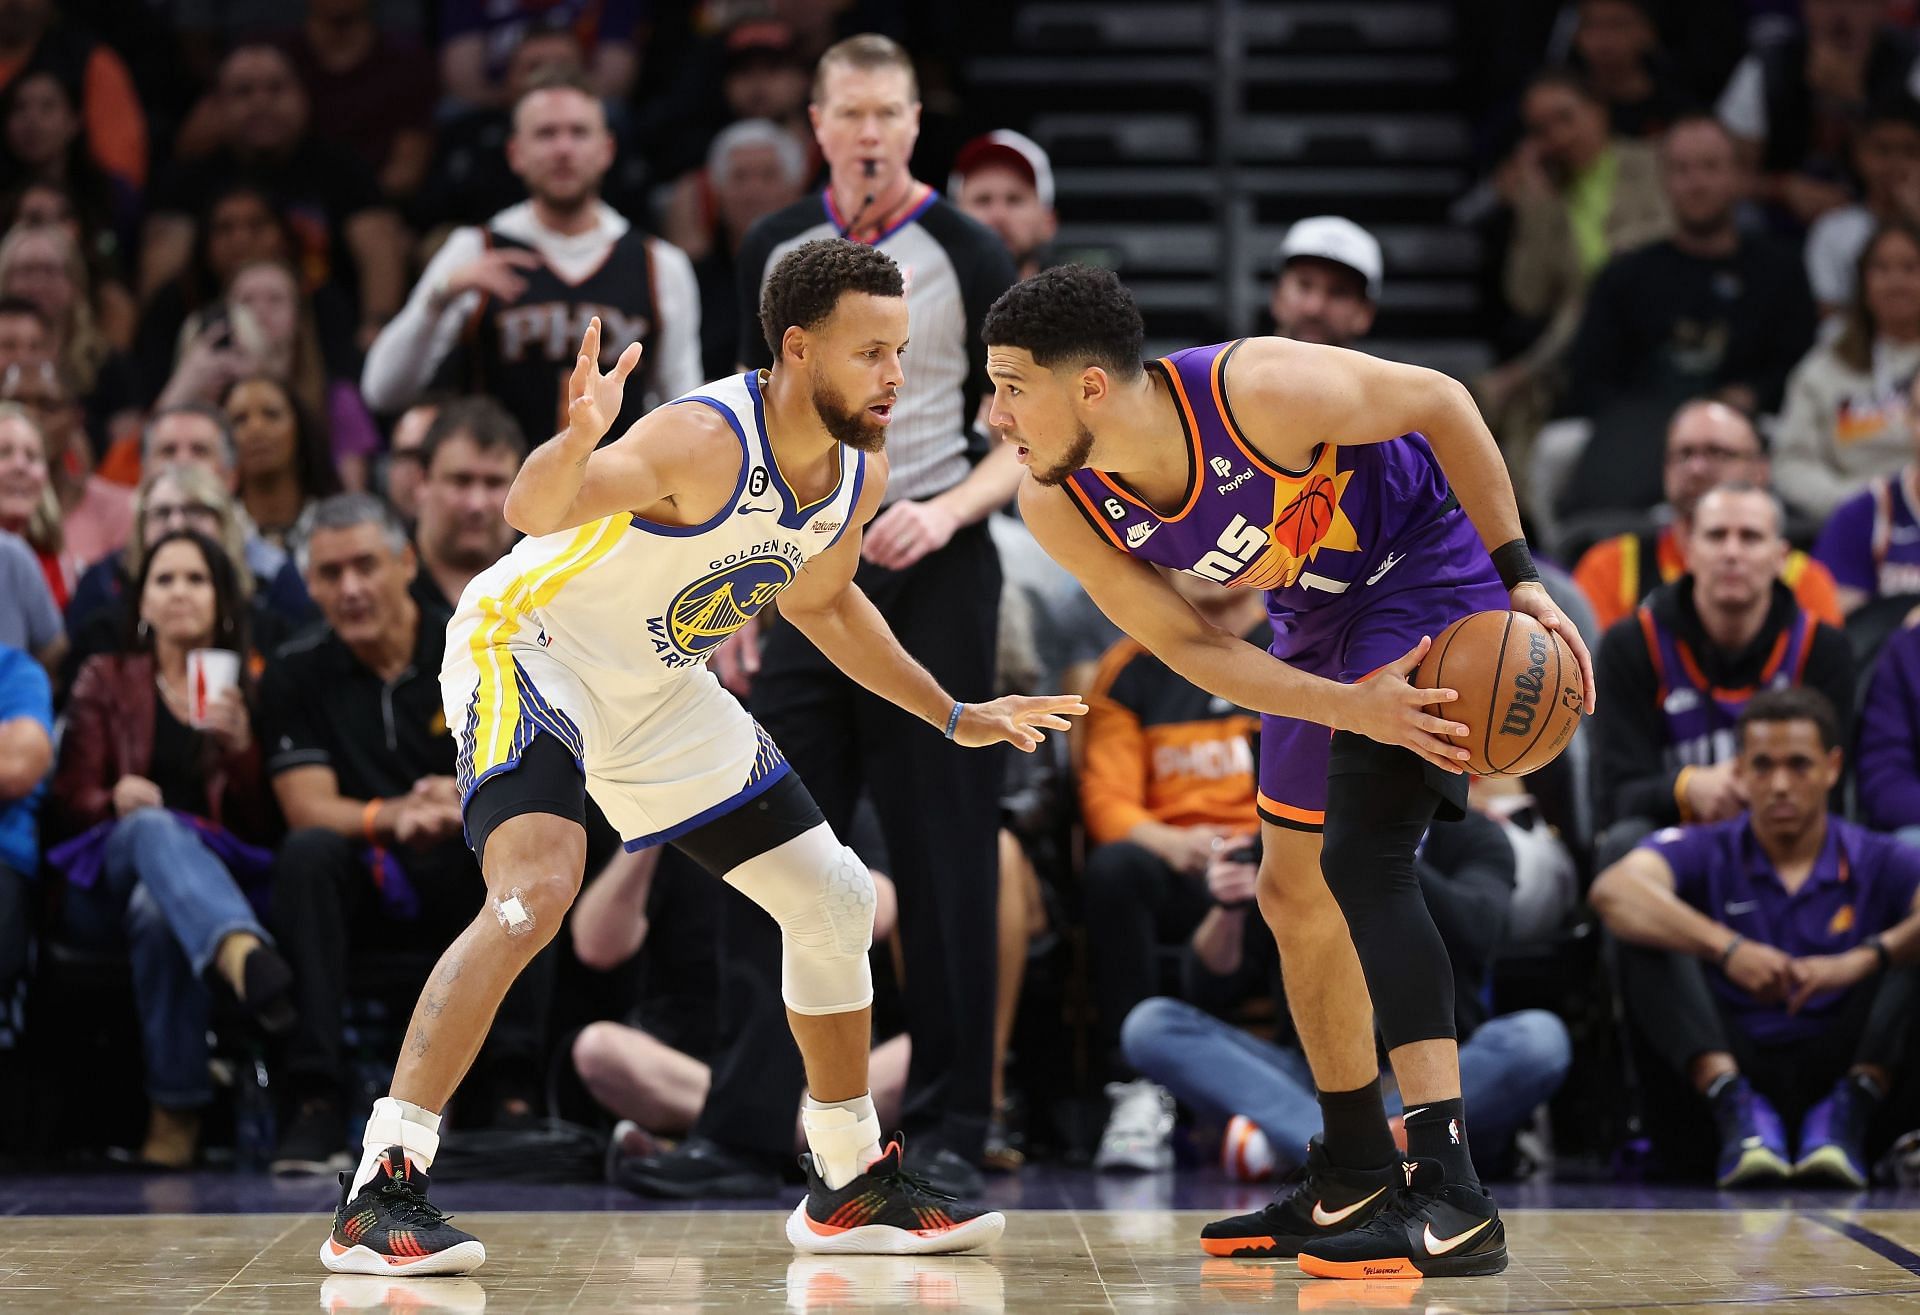 Devin Booker of the Phoenix Suns handles the ball against Stephen Curry of the Golden State Warriors.